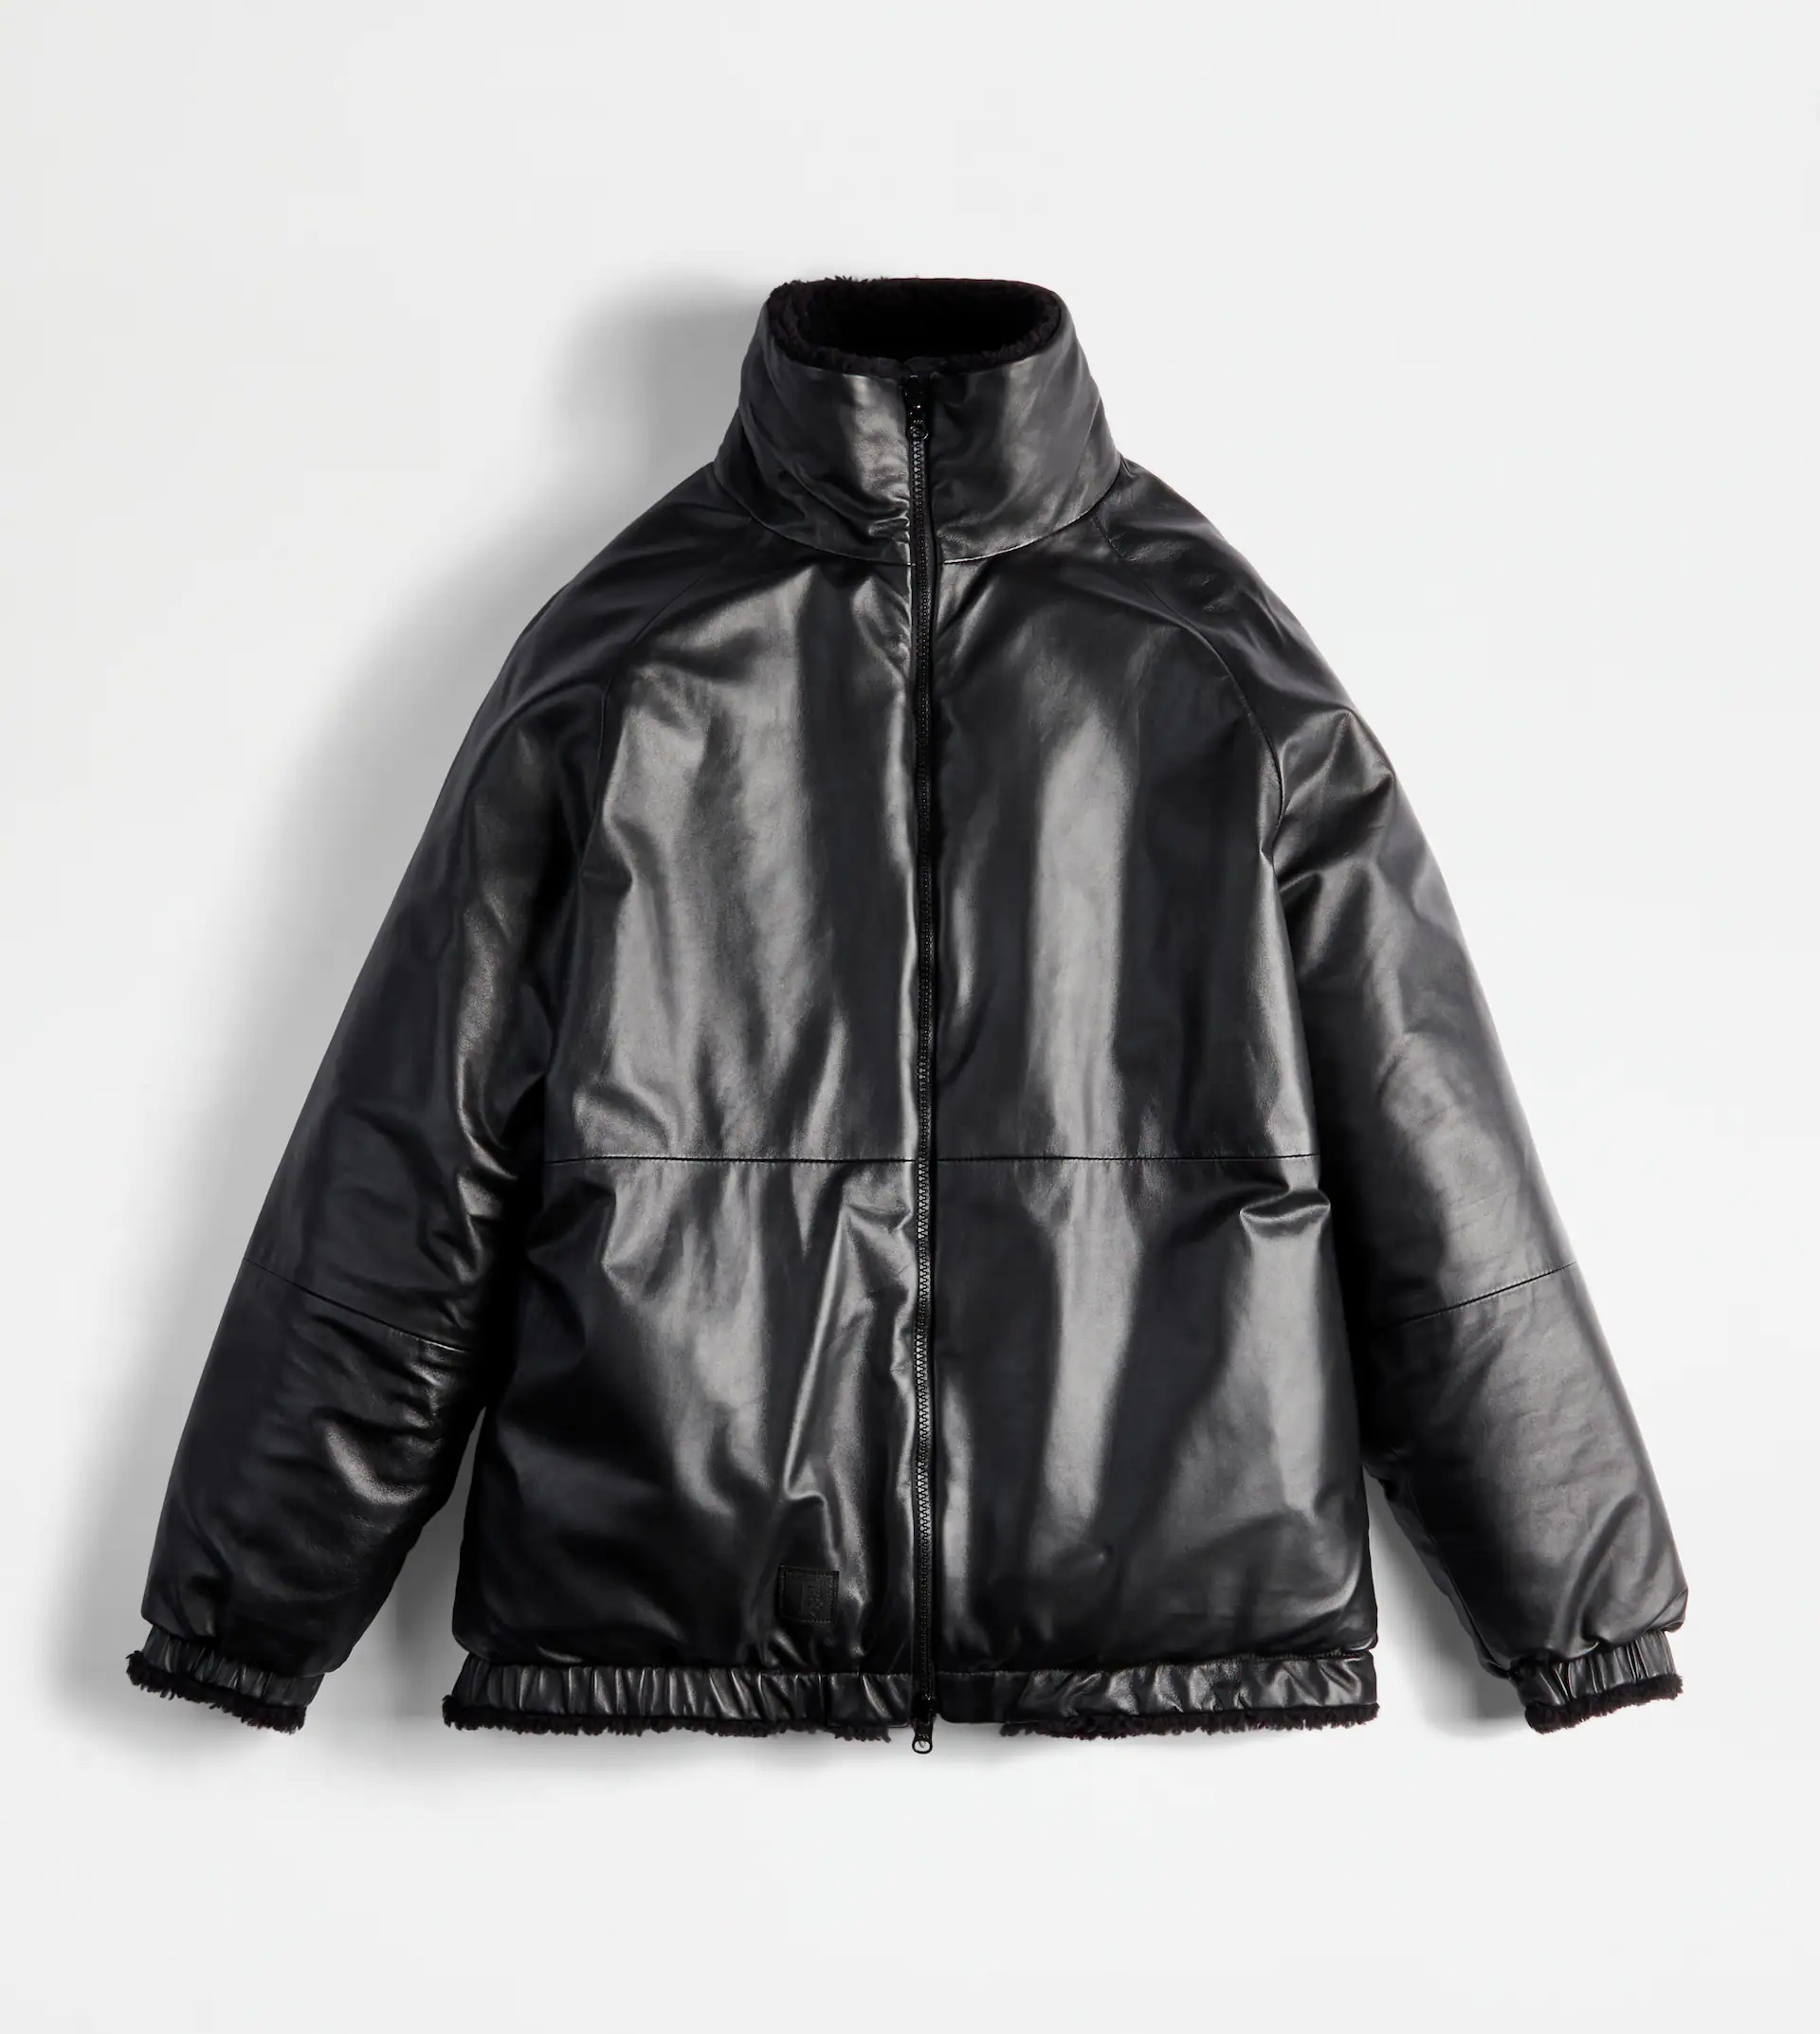 TOD'S BOMBER JACKET IN LEATHER - BLACK - 1